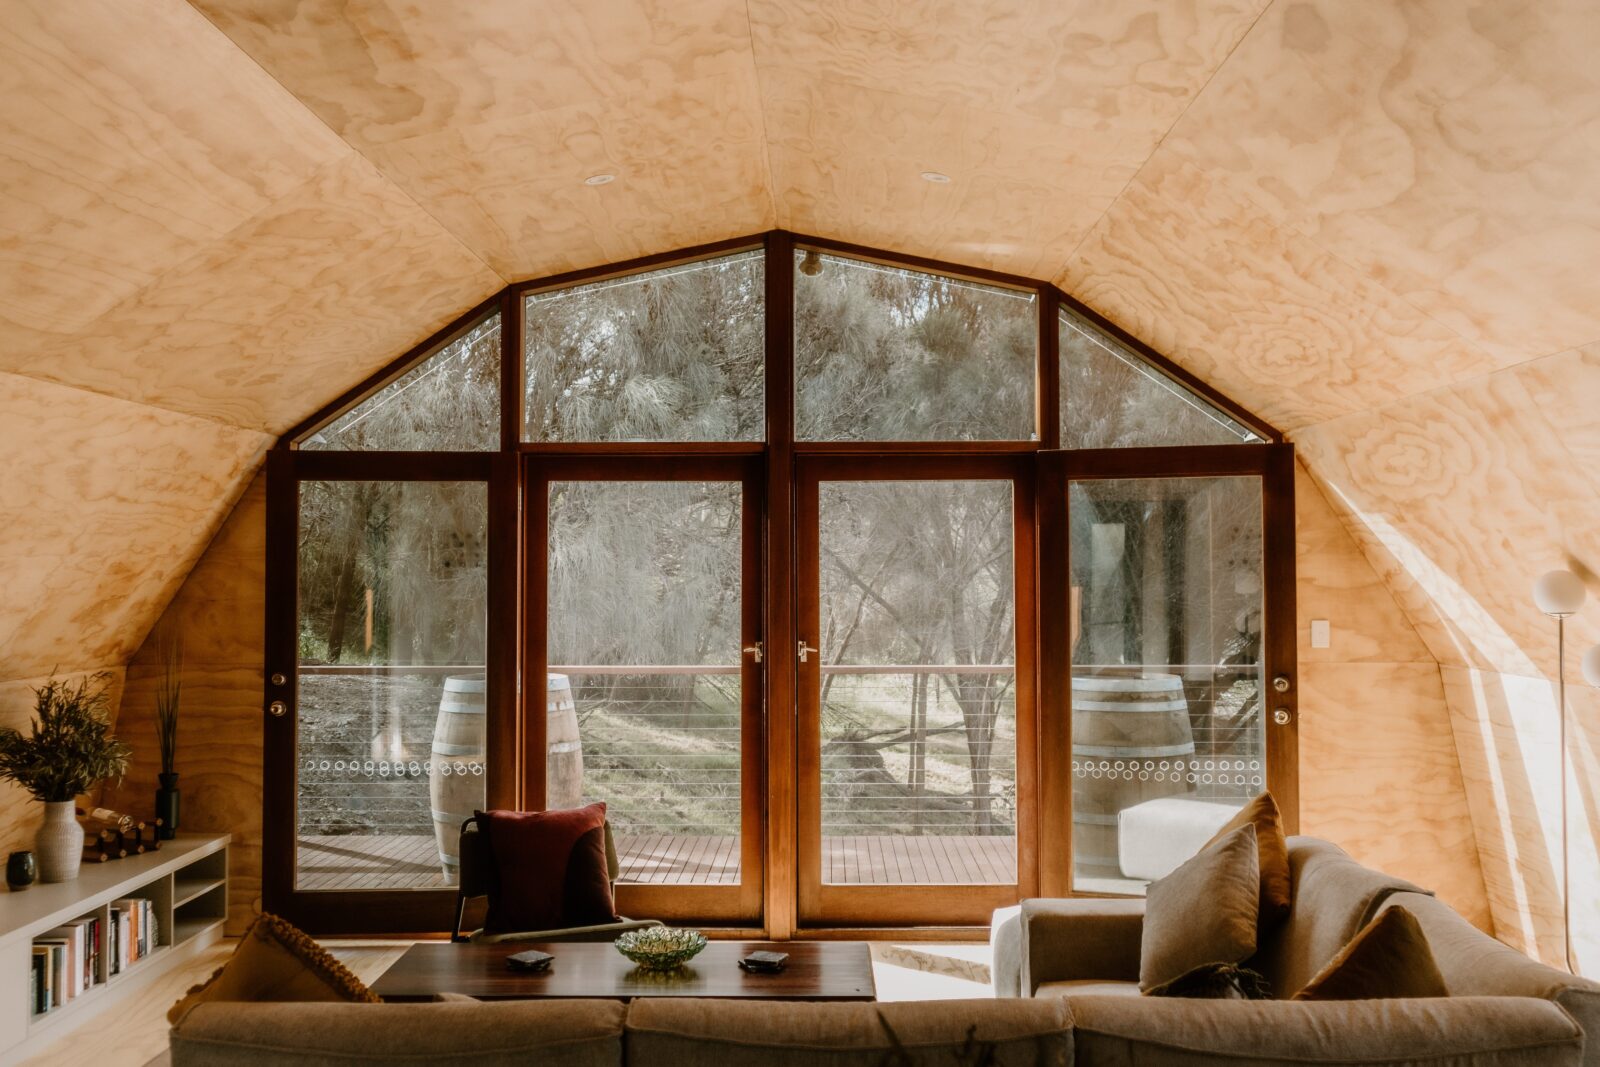 Photo of lounge area in dome house with timber walls, glass doors open and view of trees beyond.